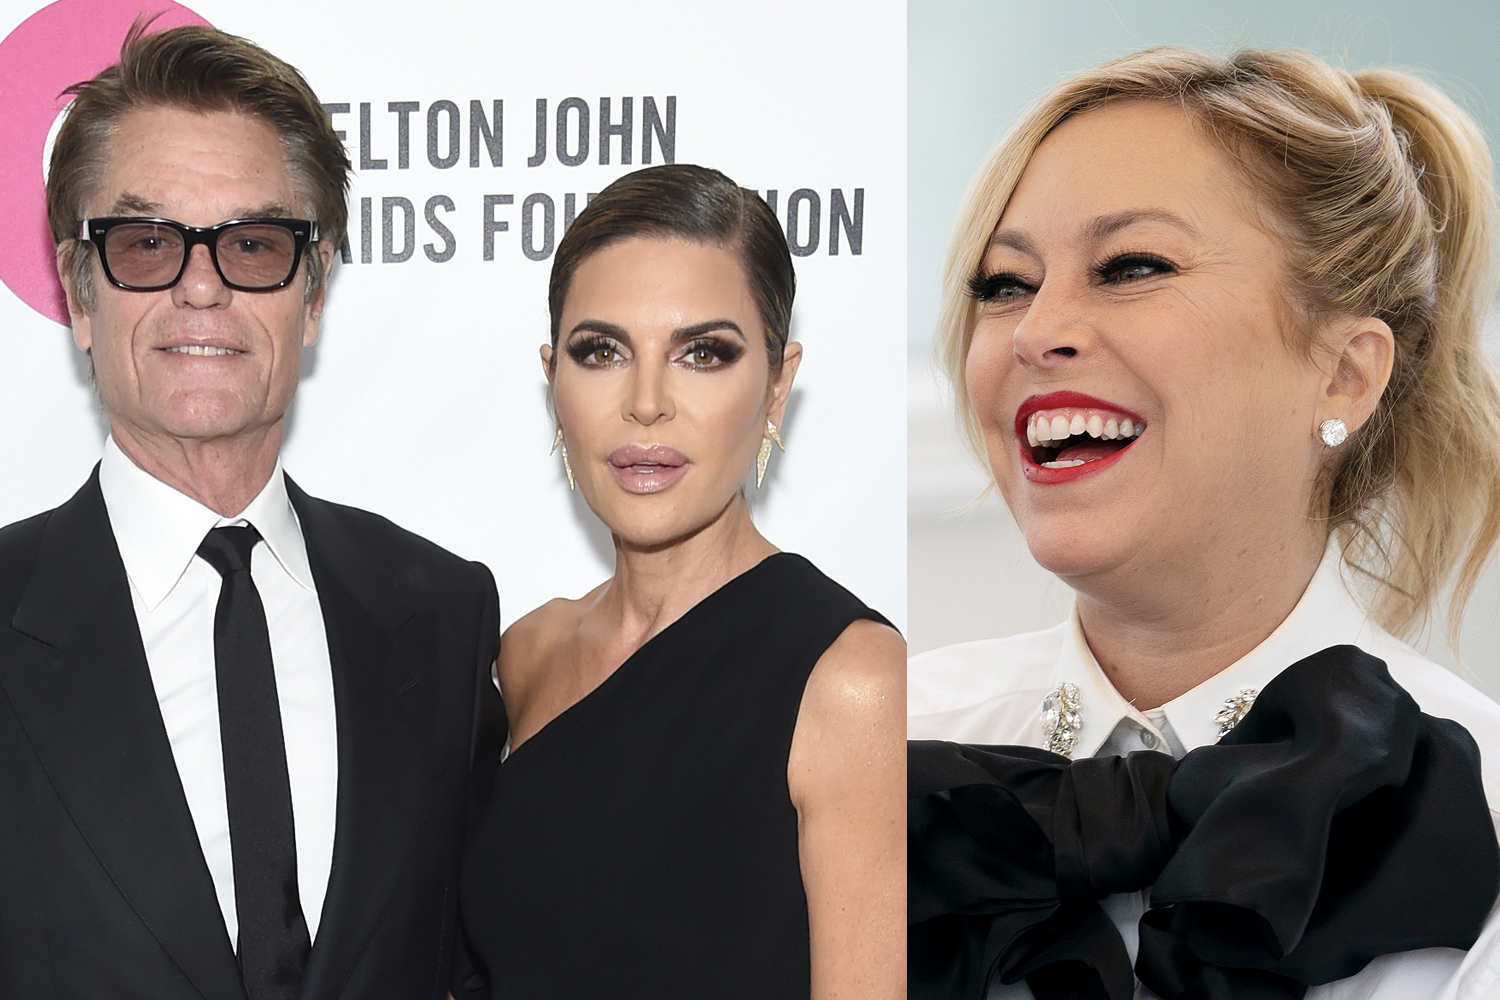 ‘RHOBH’ Star Lisa Rinna Fires Back at Sutton Stracke Again Over Claims About Elton John Event — ‘I Am This Petty’